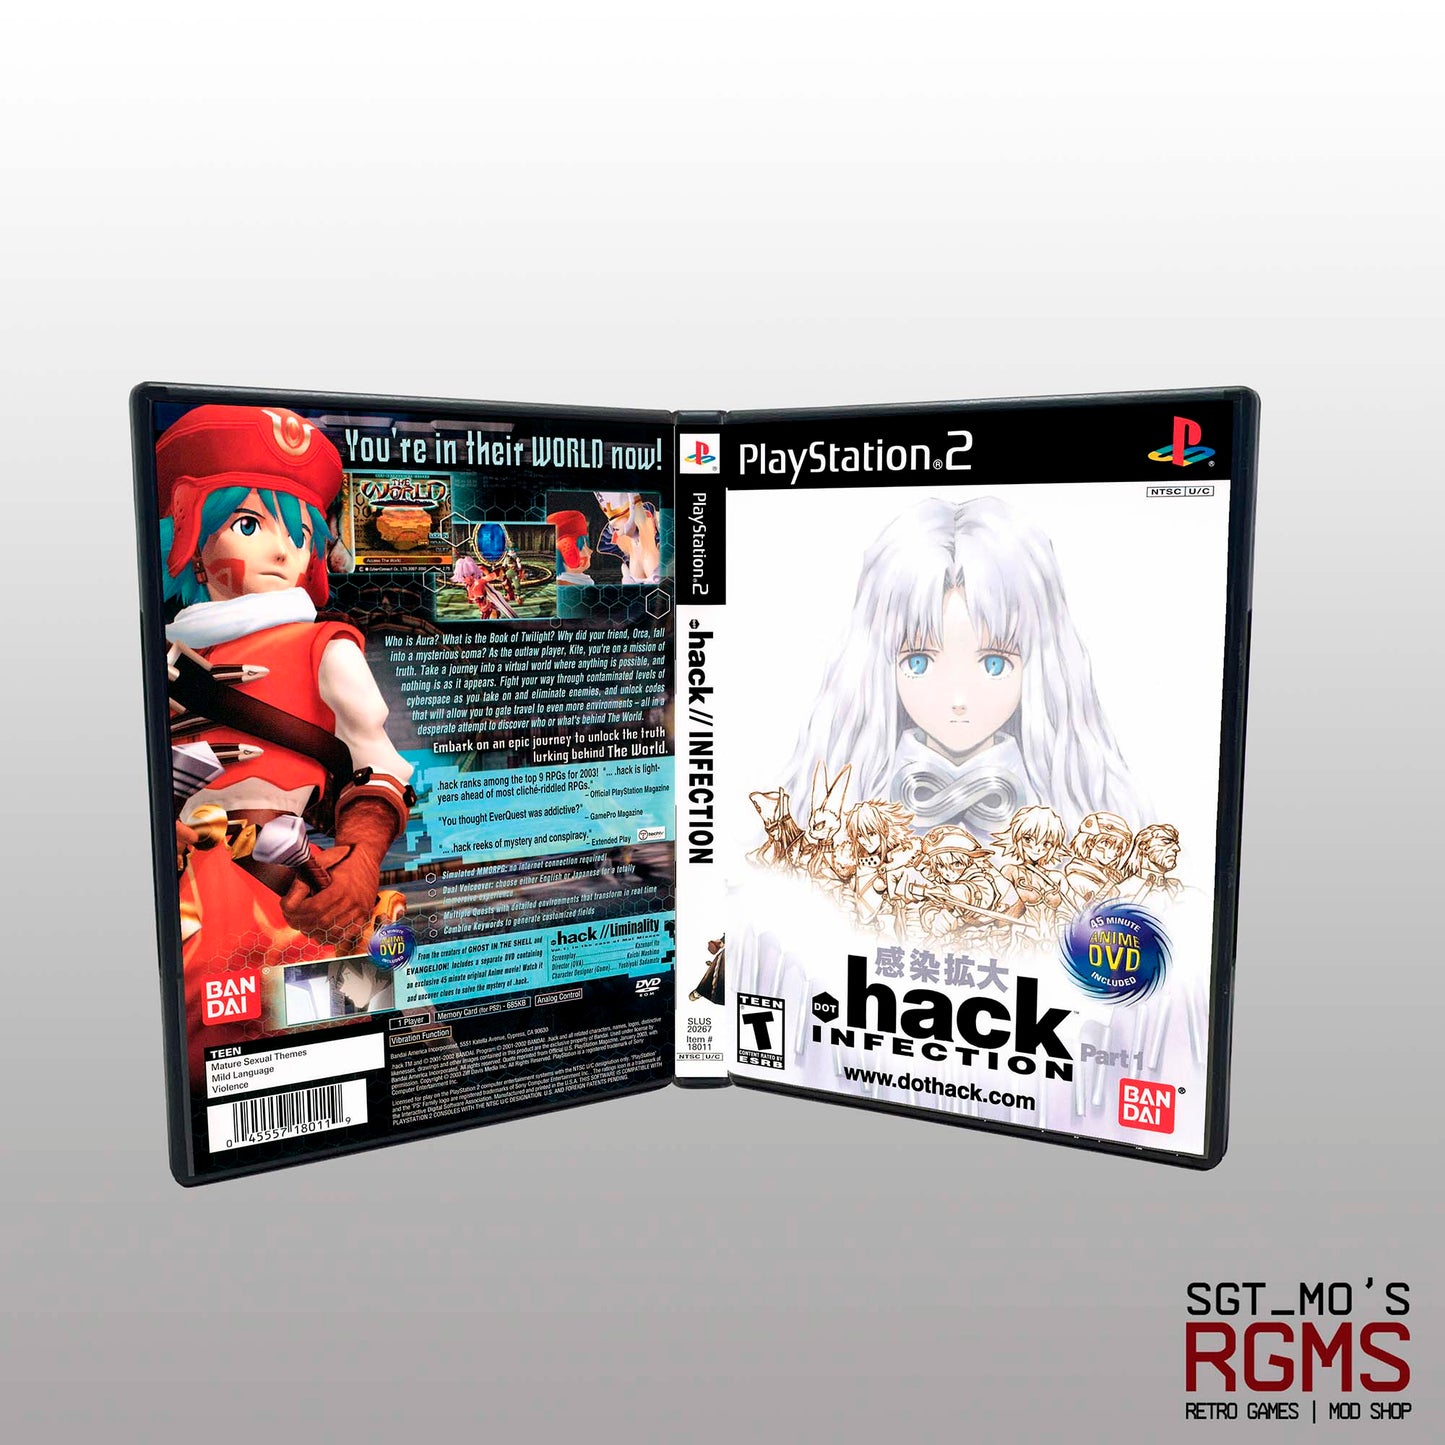 PS2 - NO GAME - Dot Hack Infection